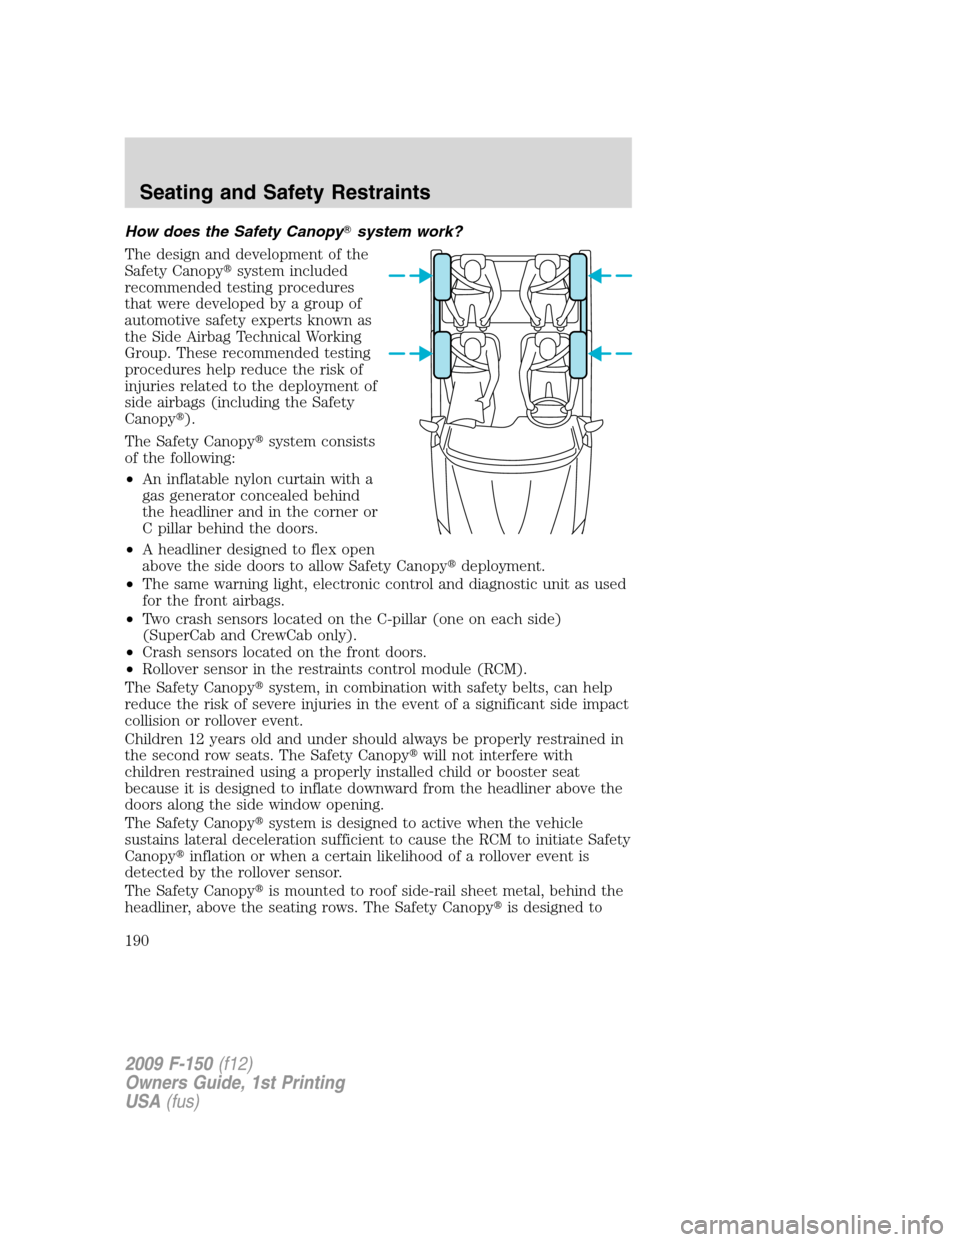 FORD F150 2009 12.G Owners Manual How does the Safety Canopysystem work?
The design and development of the
Safety Canopysystem included
recommended testing procedures
that were developed by a group of
automotive safety experts known